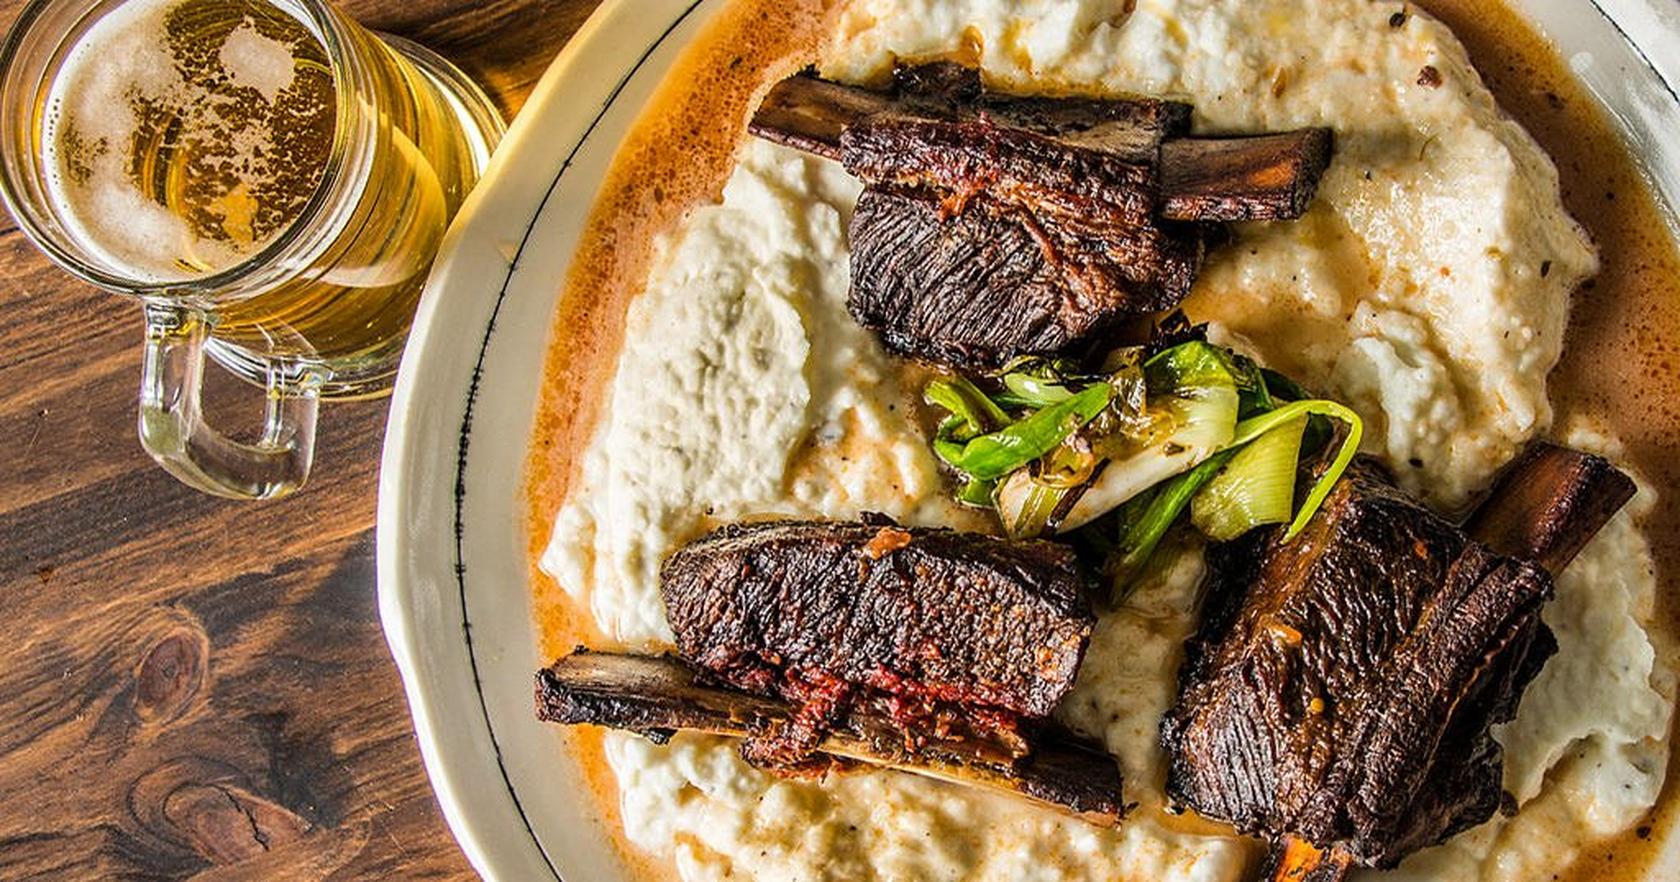 image of Braised Beef Short Ribs with Mashed Potatoes